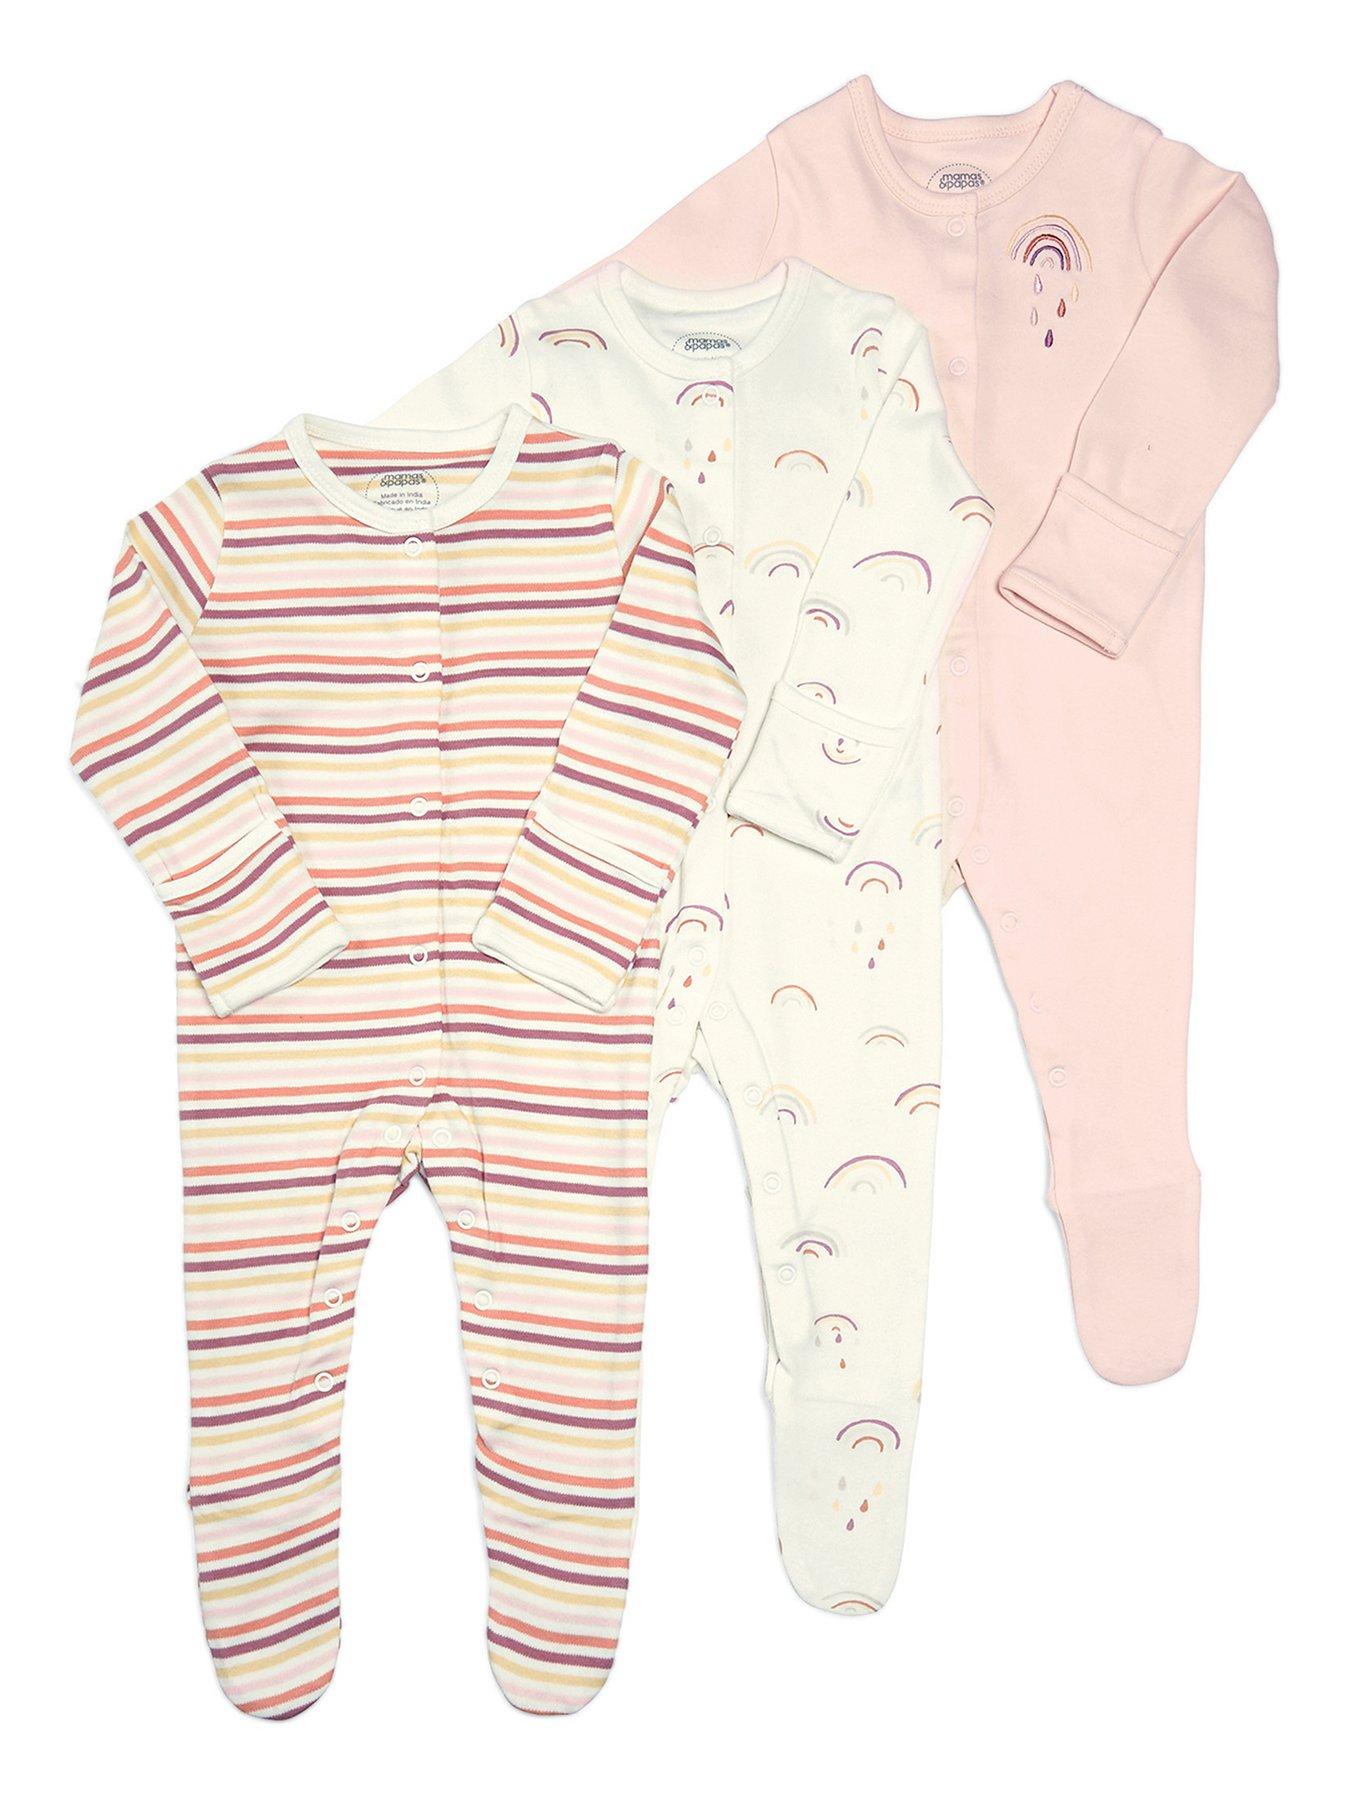 sleepsuits with built in scratch mitts